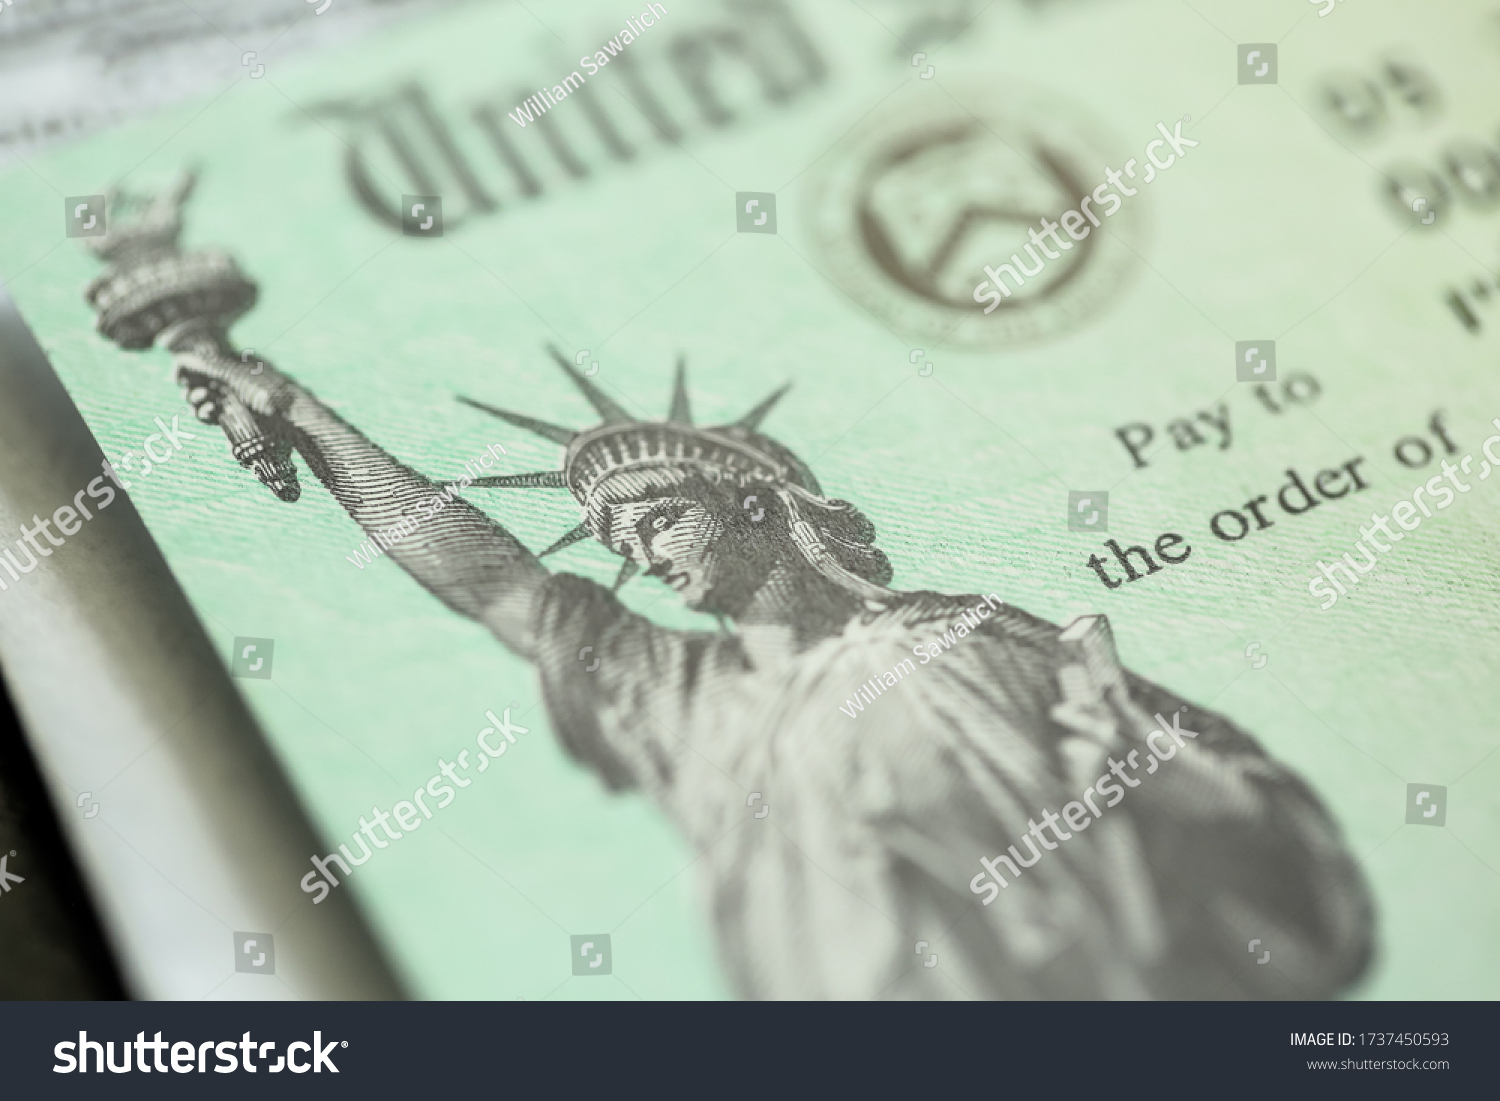 Extreme close-up of Federal coronavirus stimulus check provided to all Americans from the United States Treasury in 2020 and 2021, showing the statue of liberty.  #1737450593